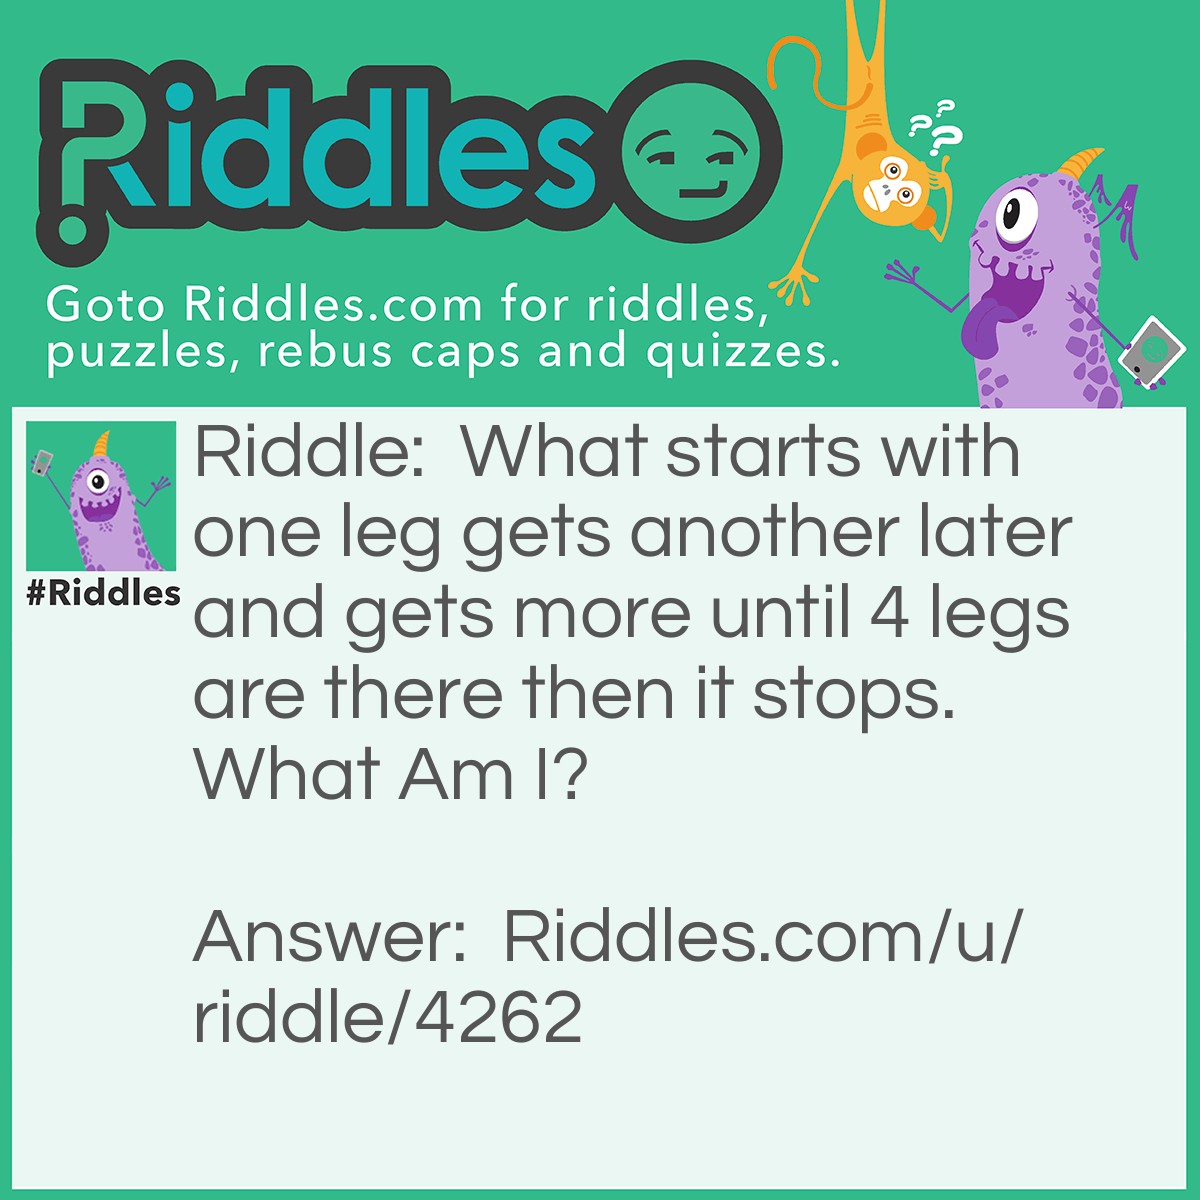 Riddle: What starts with one leg gets another later and gets more until 4 legs are there then it stops. What Am I? Answer: A table.